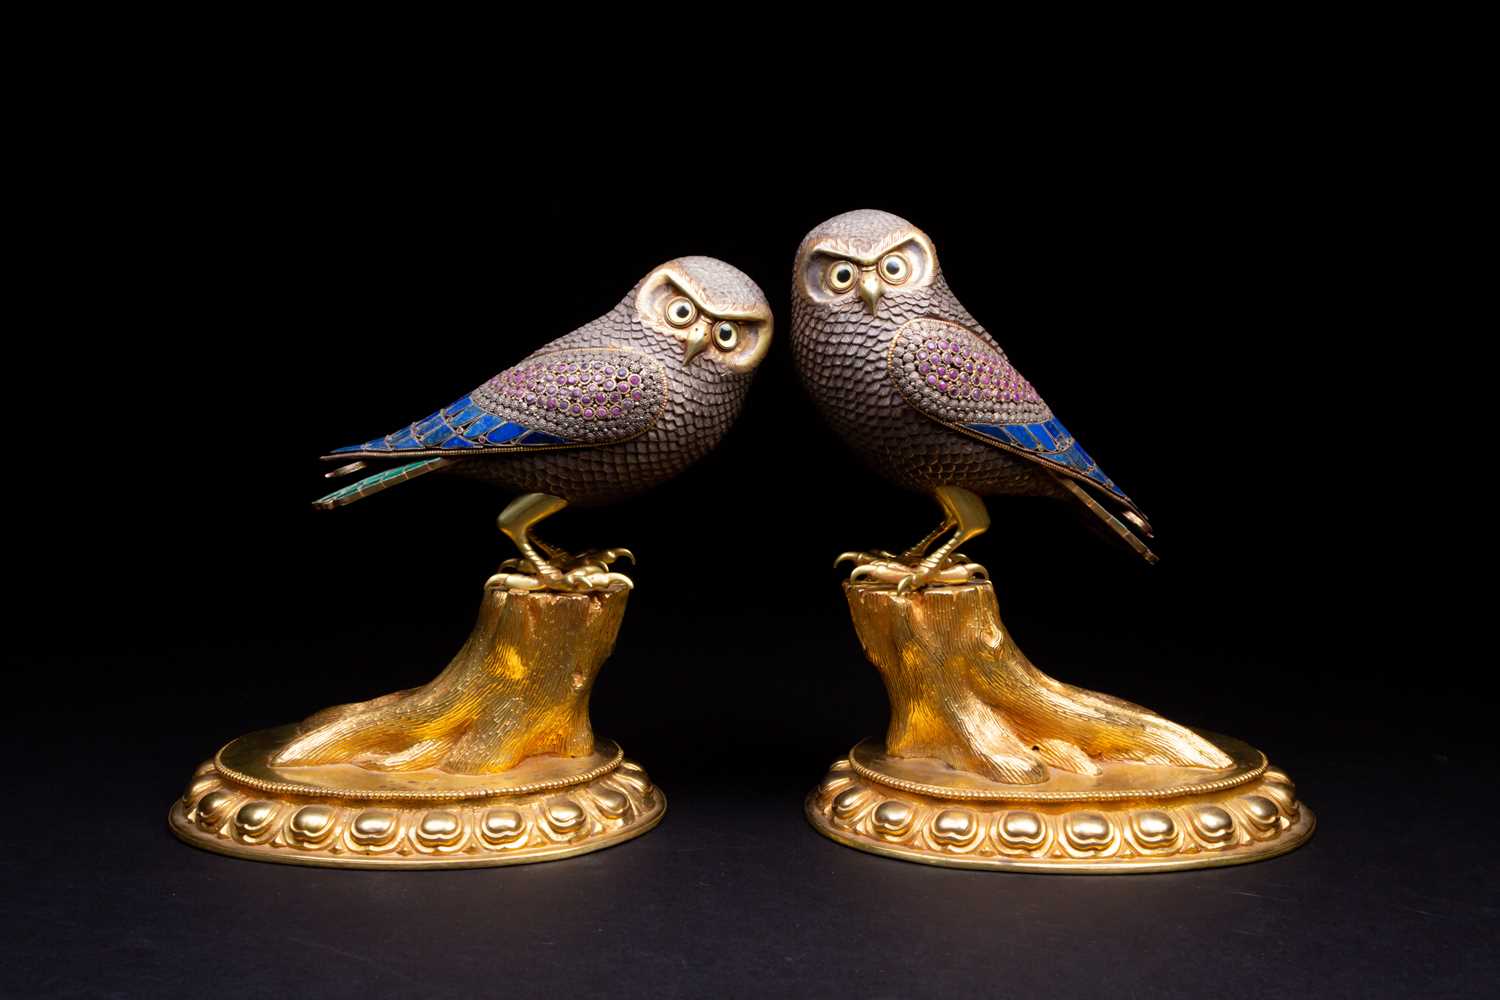 A large pair of silver and silver gilt owls, 20th century, with gilt beak and brows, one with